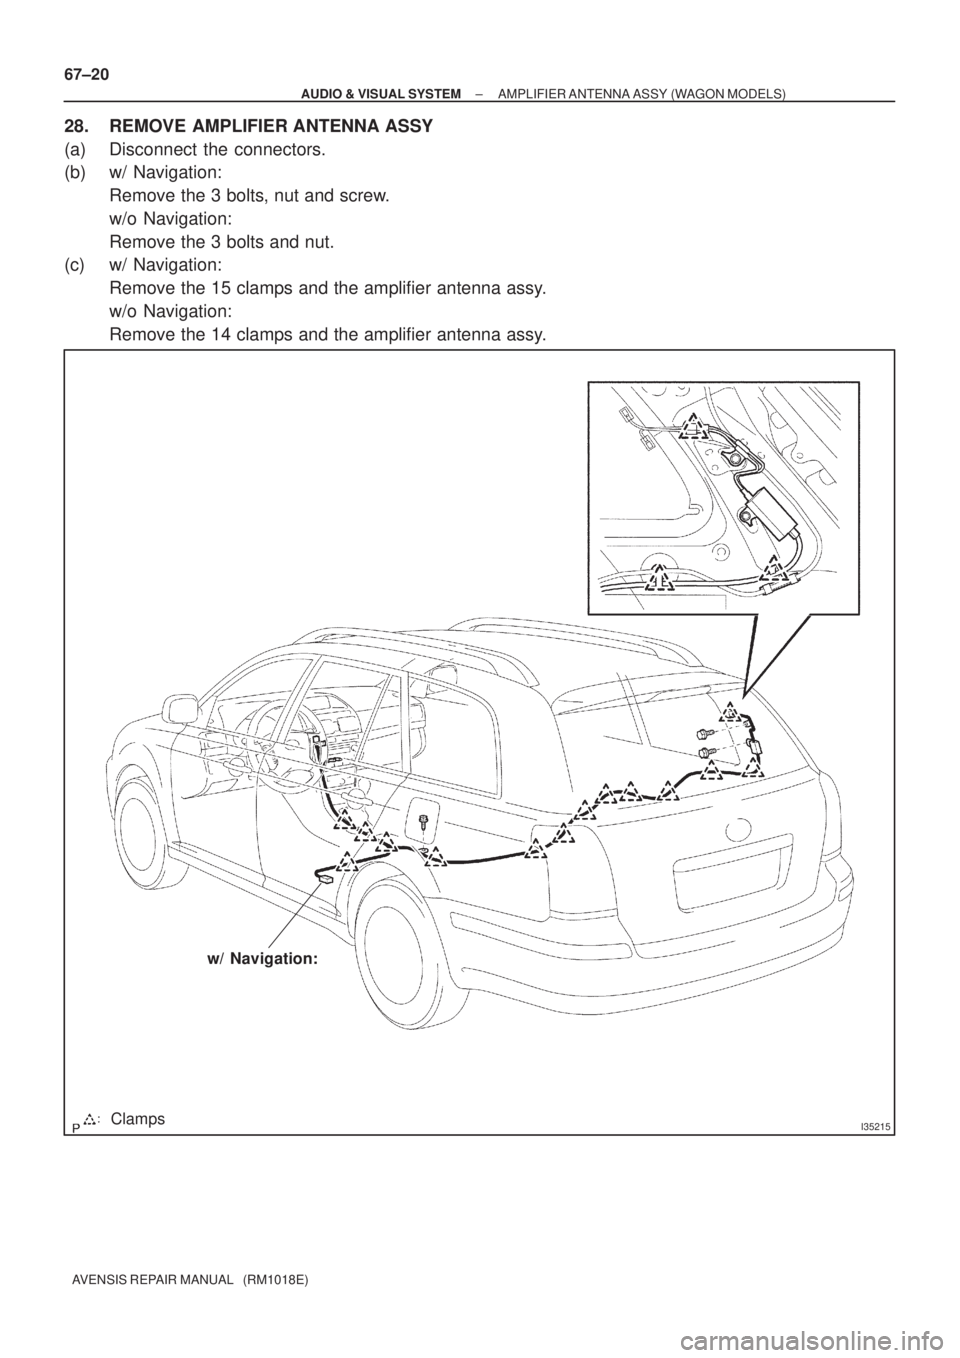 TOYOTA AVENSIS 2005  Service Repair Manual I35215Clamps
w/ Navigation:
67±20
± AUDIO & VISUAL SYSTEMAMPLIFIER ANTENNA ASSY (WAGON MODELS)
AVENSIS REPAIR MANUAL   (RM1018E)
28. REMOVE AMPLIFIER ANTENNA ASSY
(a) Disconnect the connectors.
(b) 